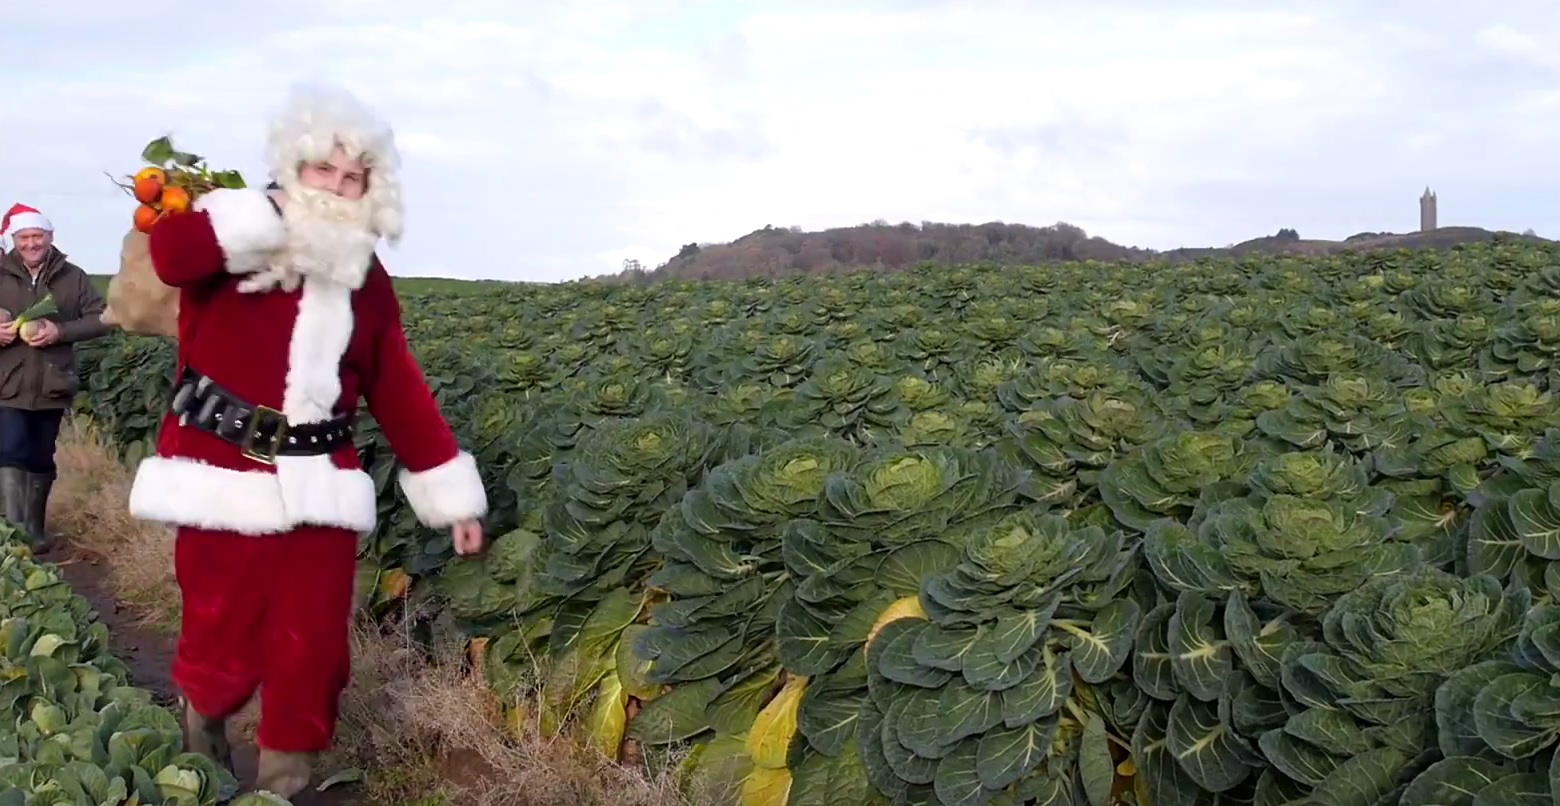 Northern Ireland's vegetable producers are feeling festive